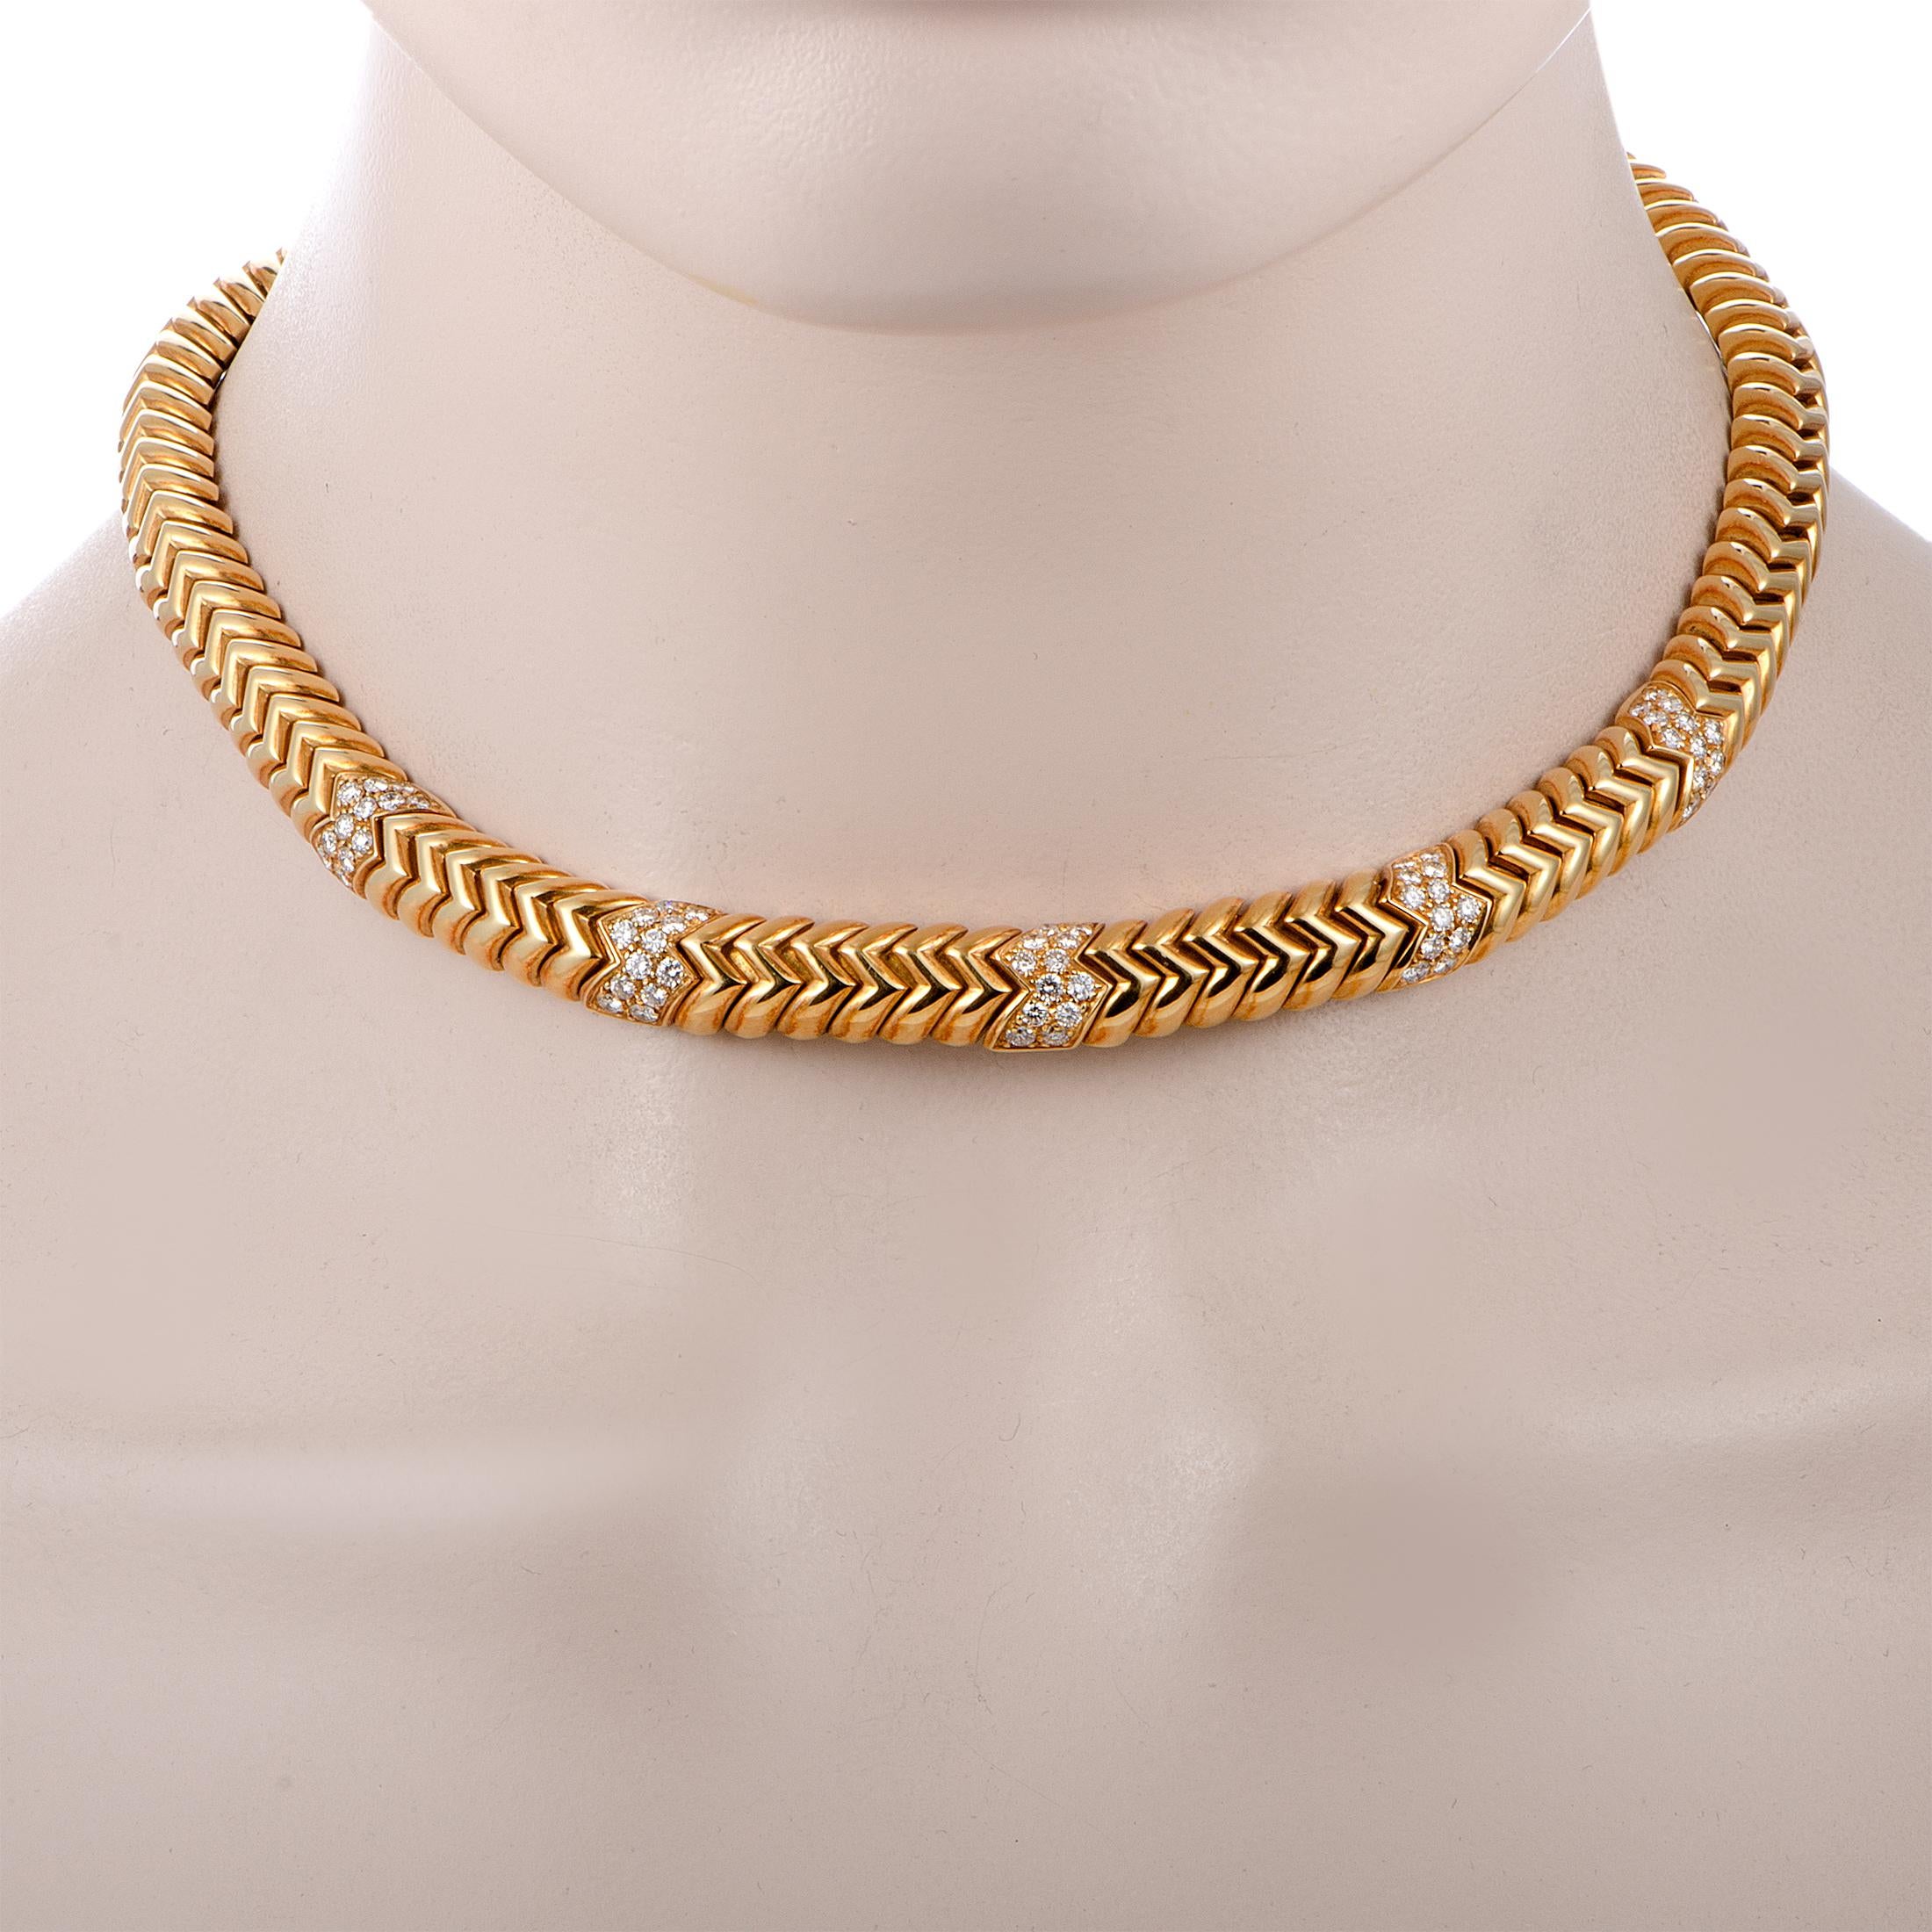 The Bvlgari “Spiga” necklace is made out of 18K rose gold and diamonds and weighs 132.1 grams, measuring 16.00” in length. The diamonds boast grade F color and VS clarity and amount to approximately 2.10 carats.

This jewelry piece is offered in